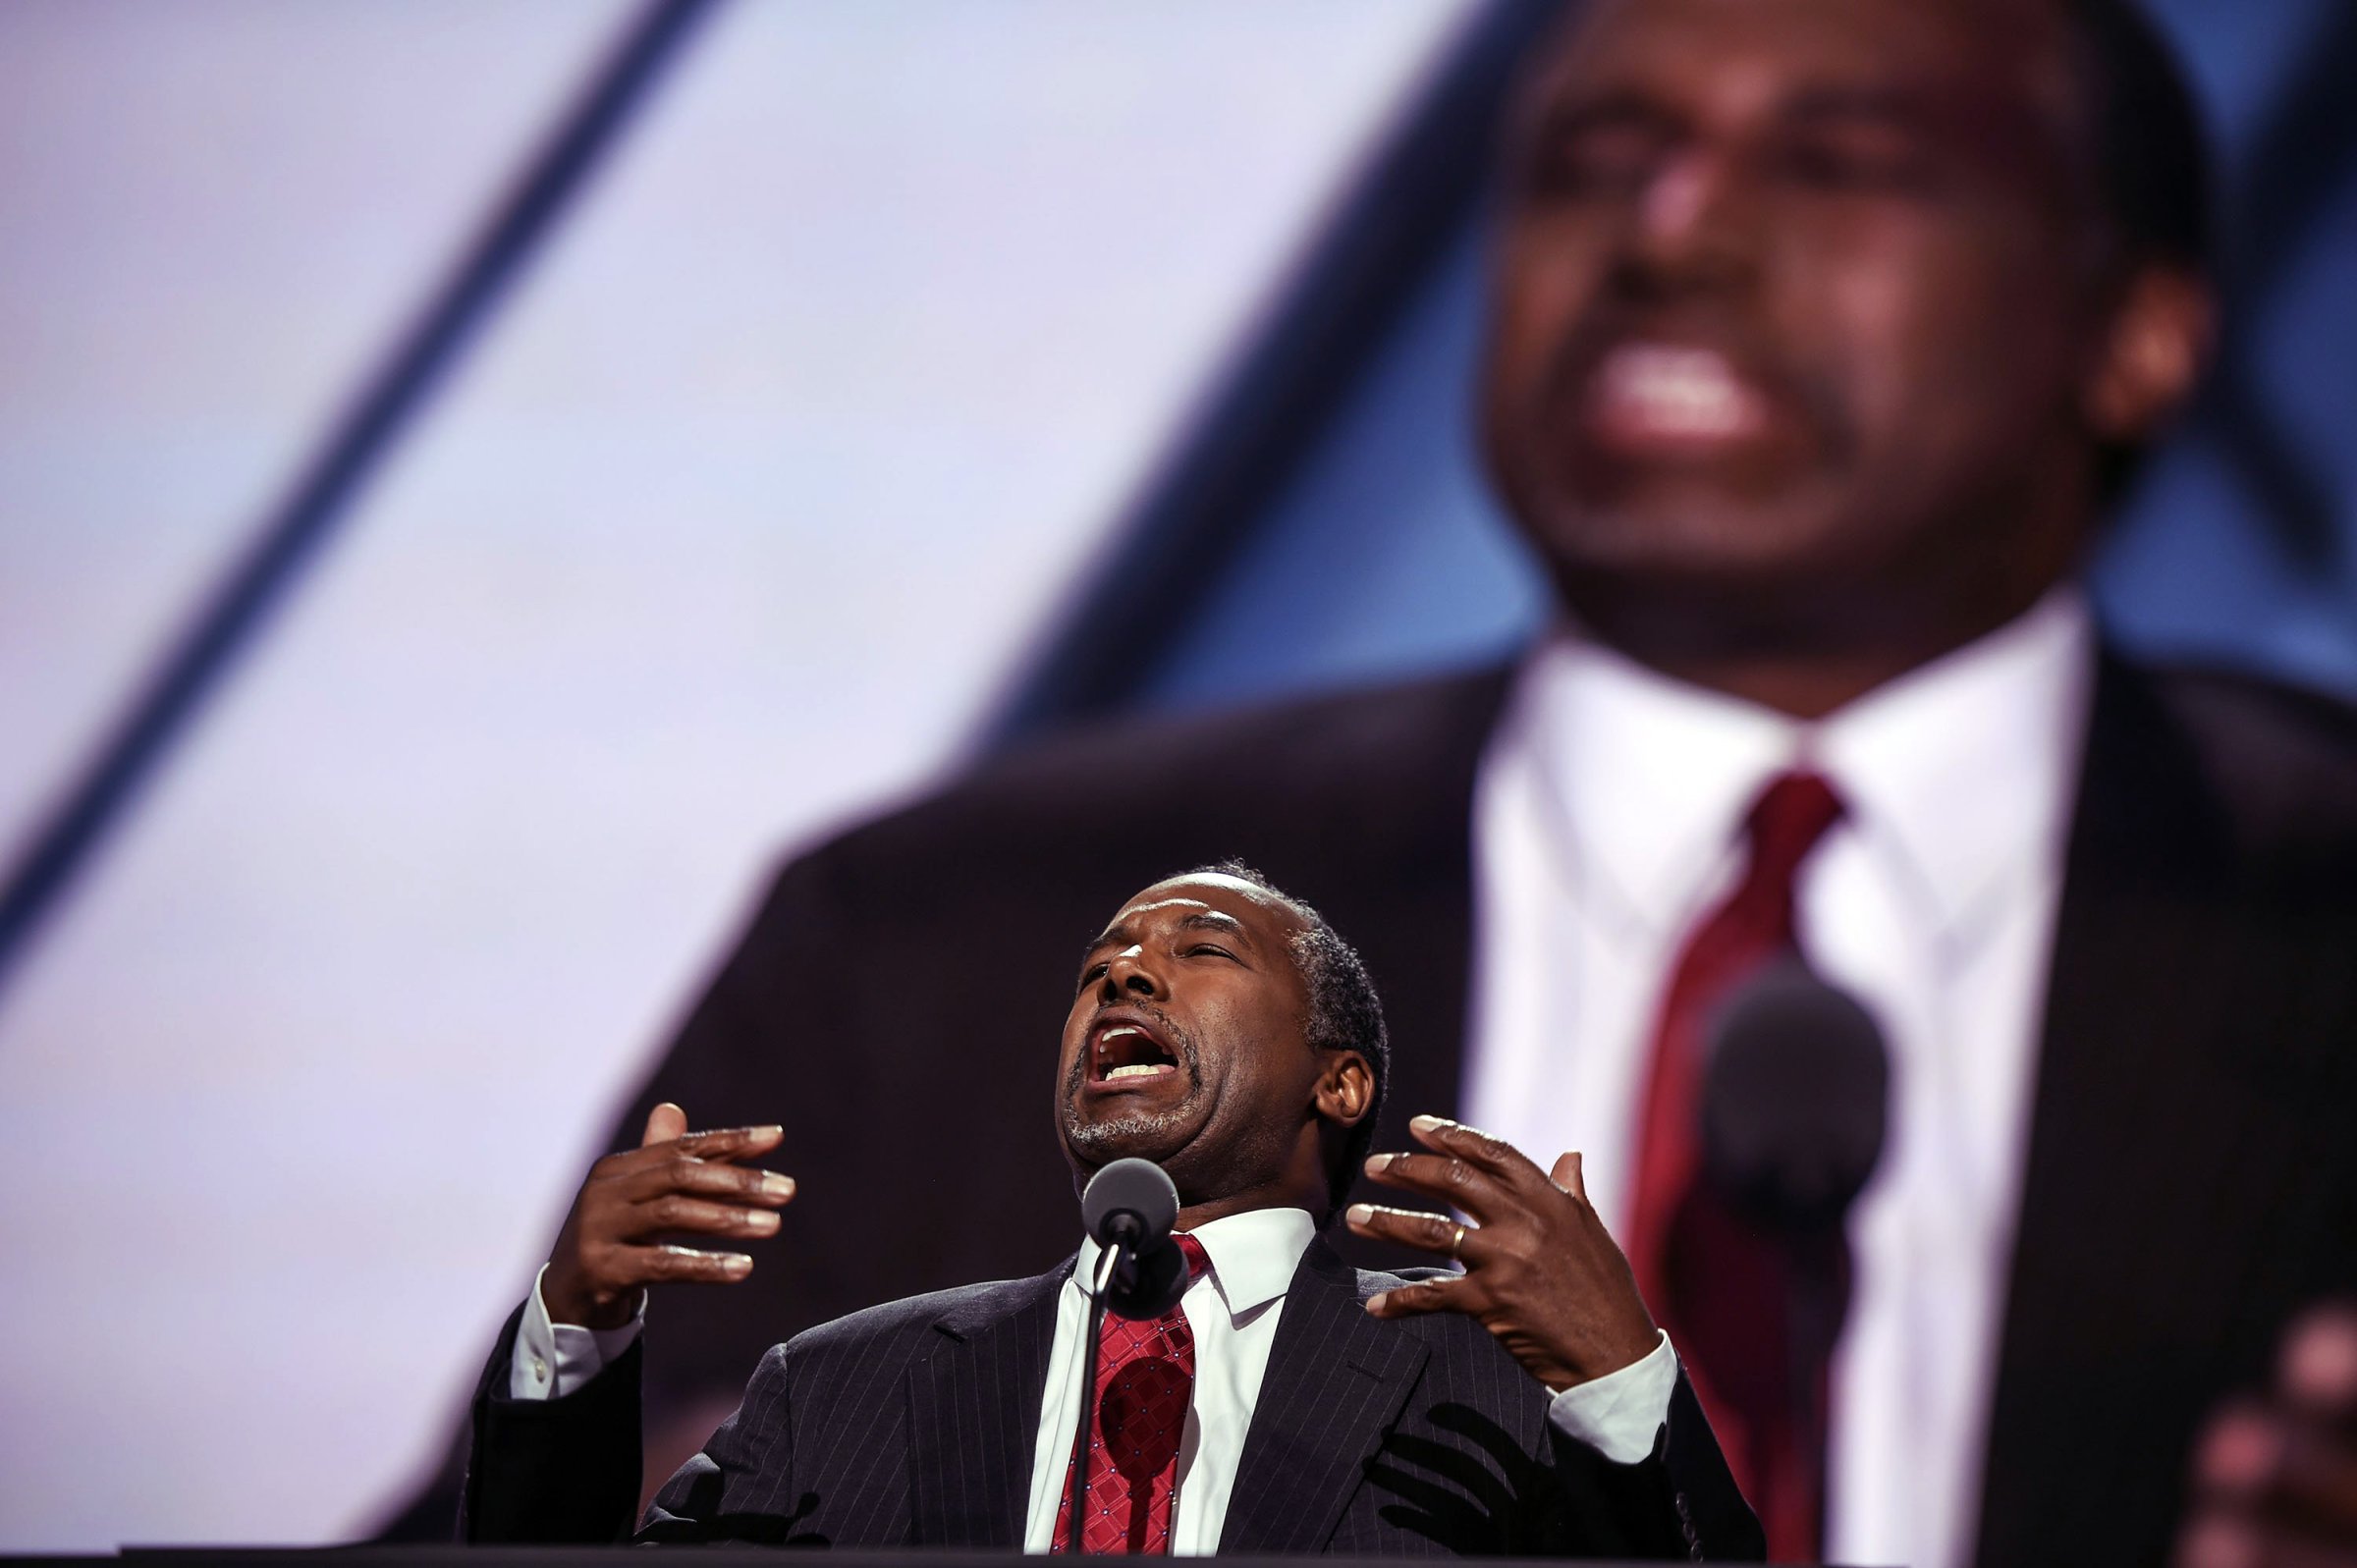 Retired neurosurgeon and former Republican presidential candidate Ben Carson speaks during the second day of the Republican National Convention on July 19, 2016 in Cleveland.